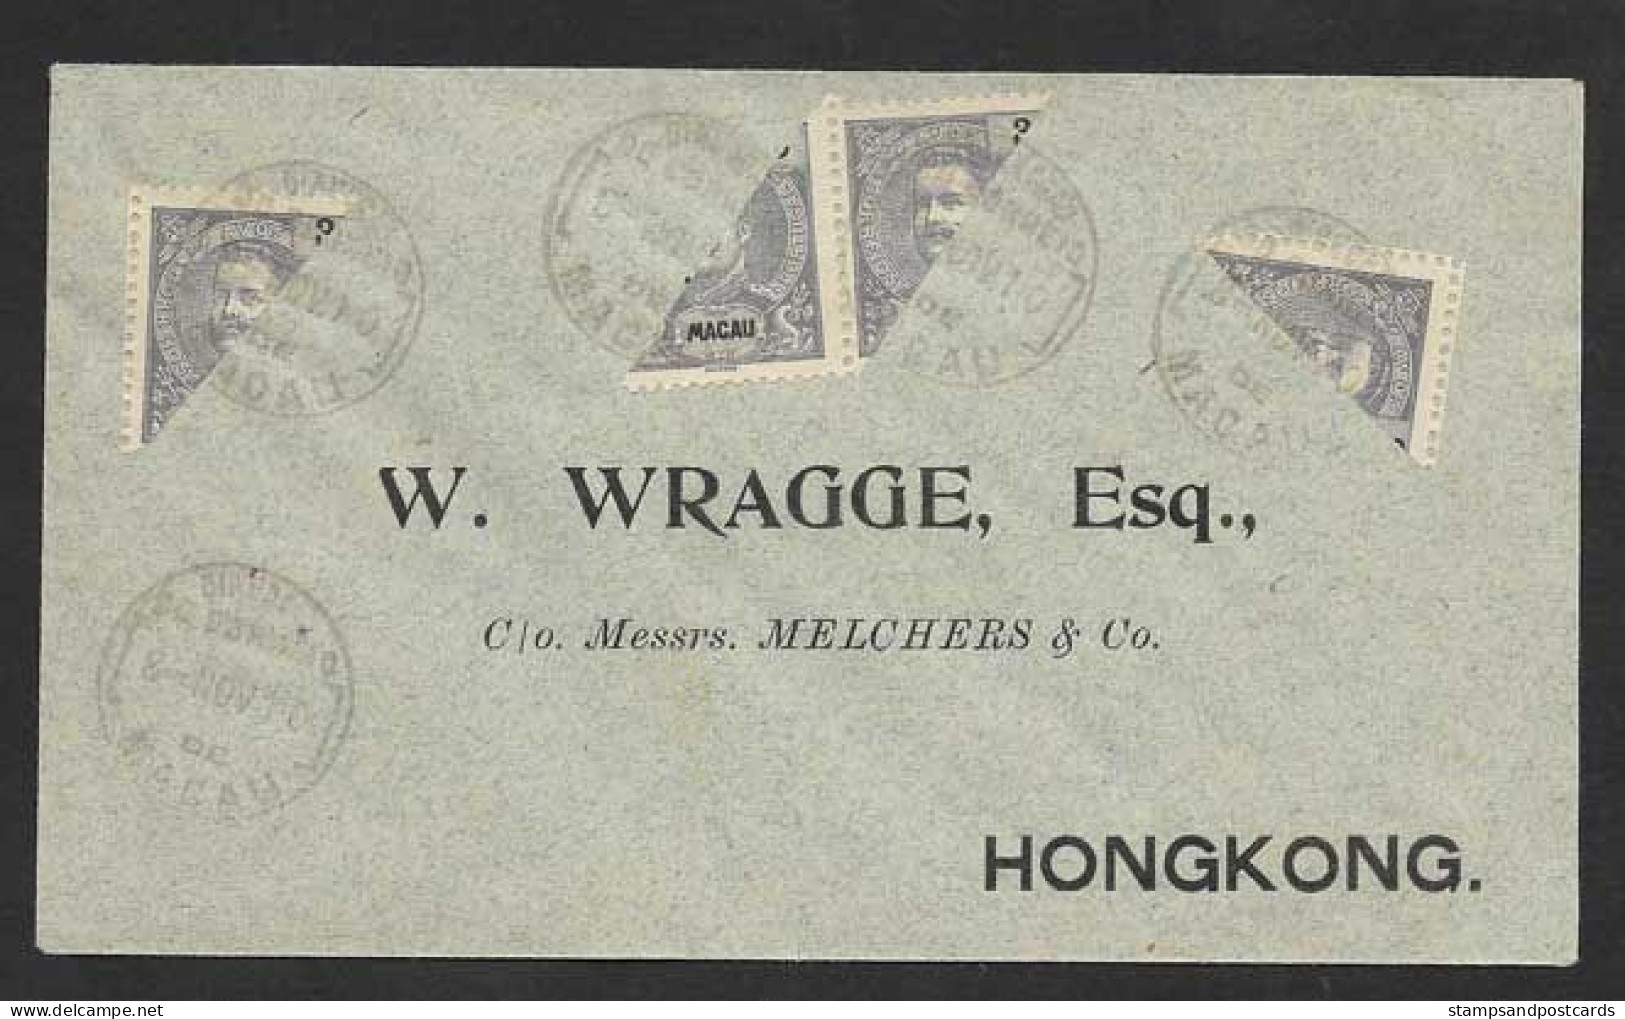 Macau Portugal Chine Lettre 1910 A Hong Kong Timbres Bissect 2a D Carlos Macao China Cover D Carlos Bisect Stamp - Covers & Documents